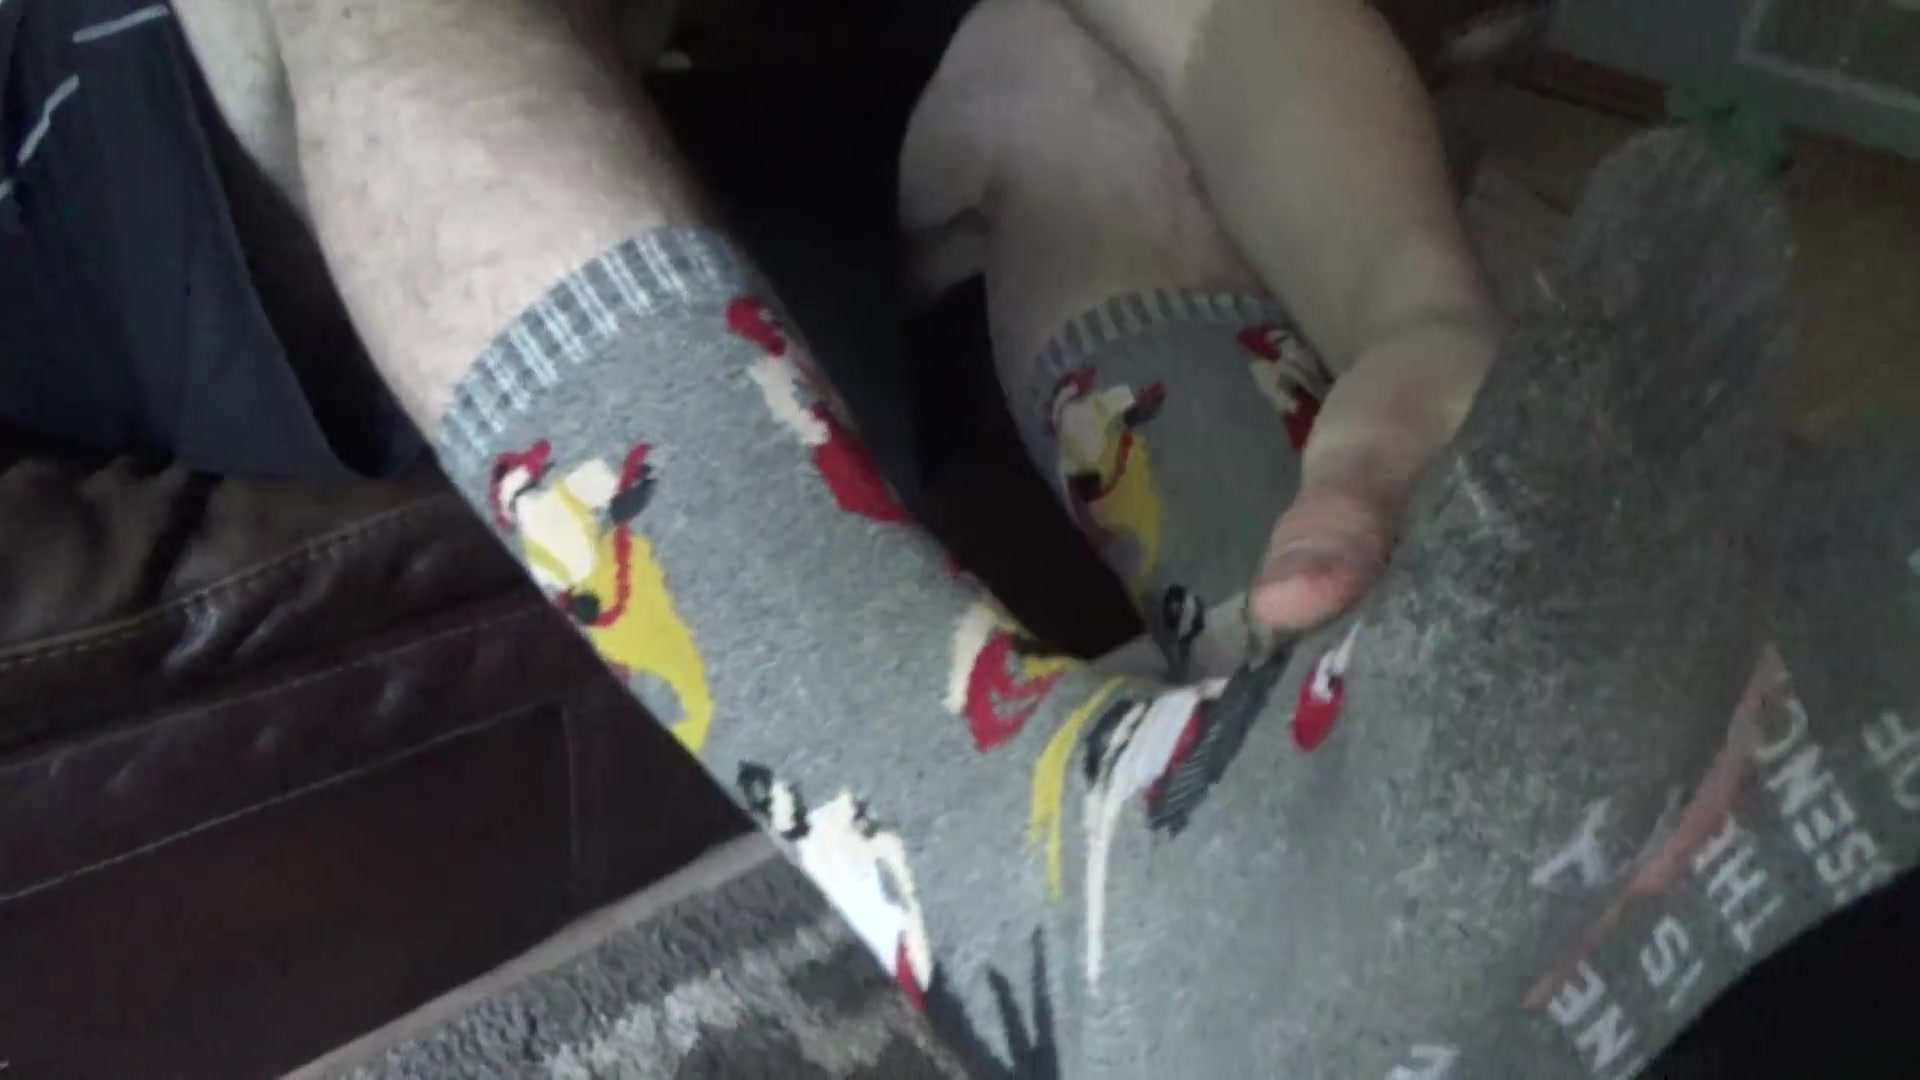 Showing You My Dirty Feet and Socks - video 2